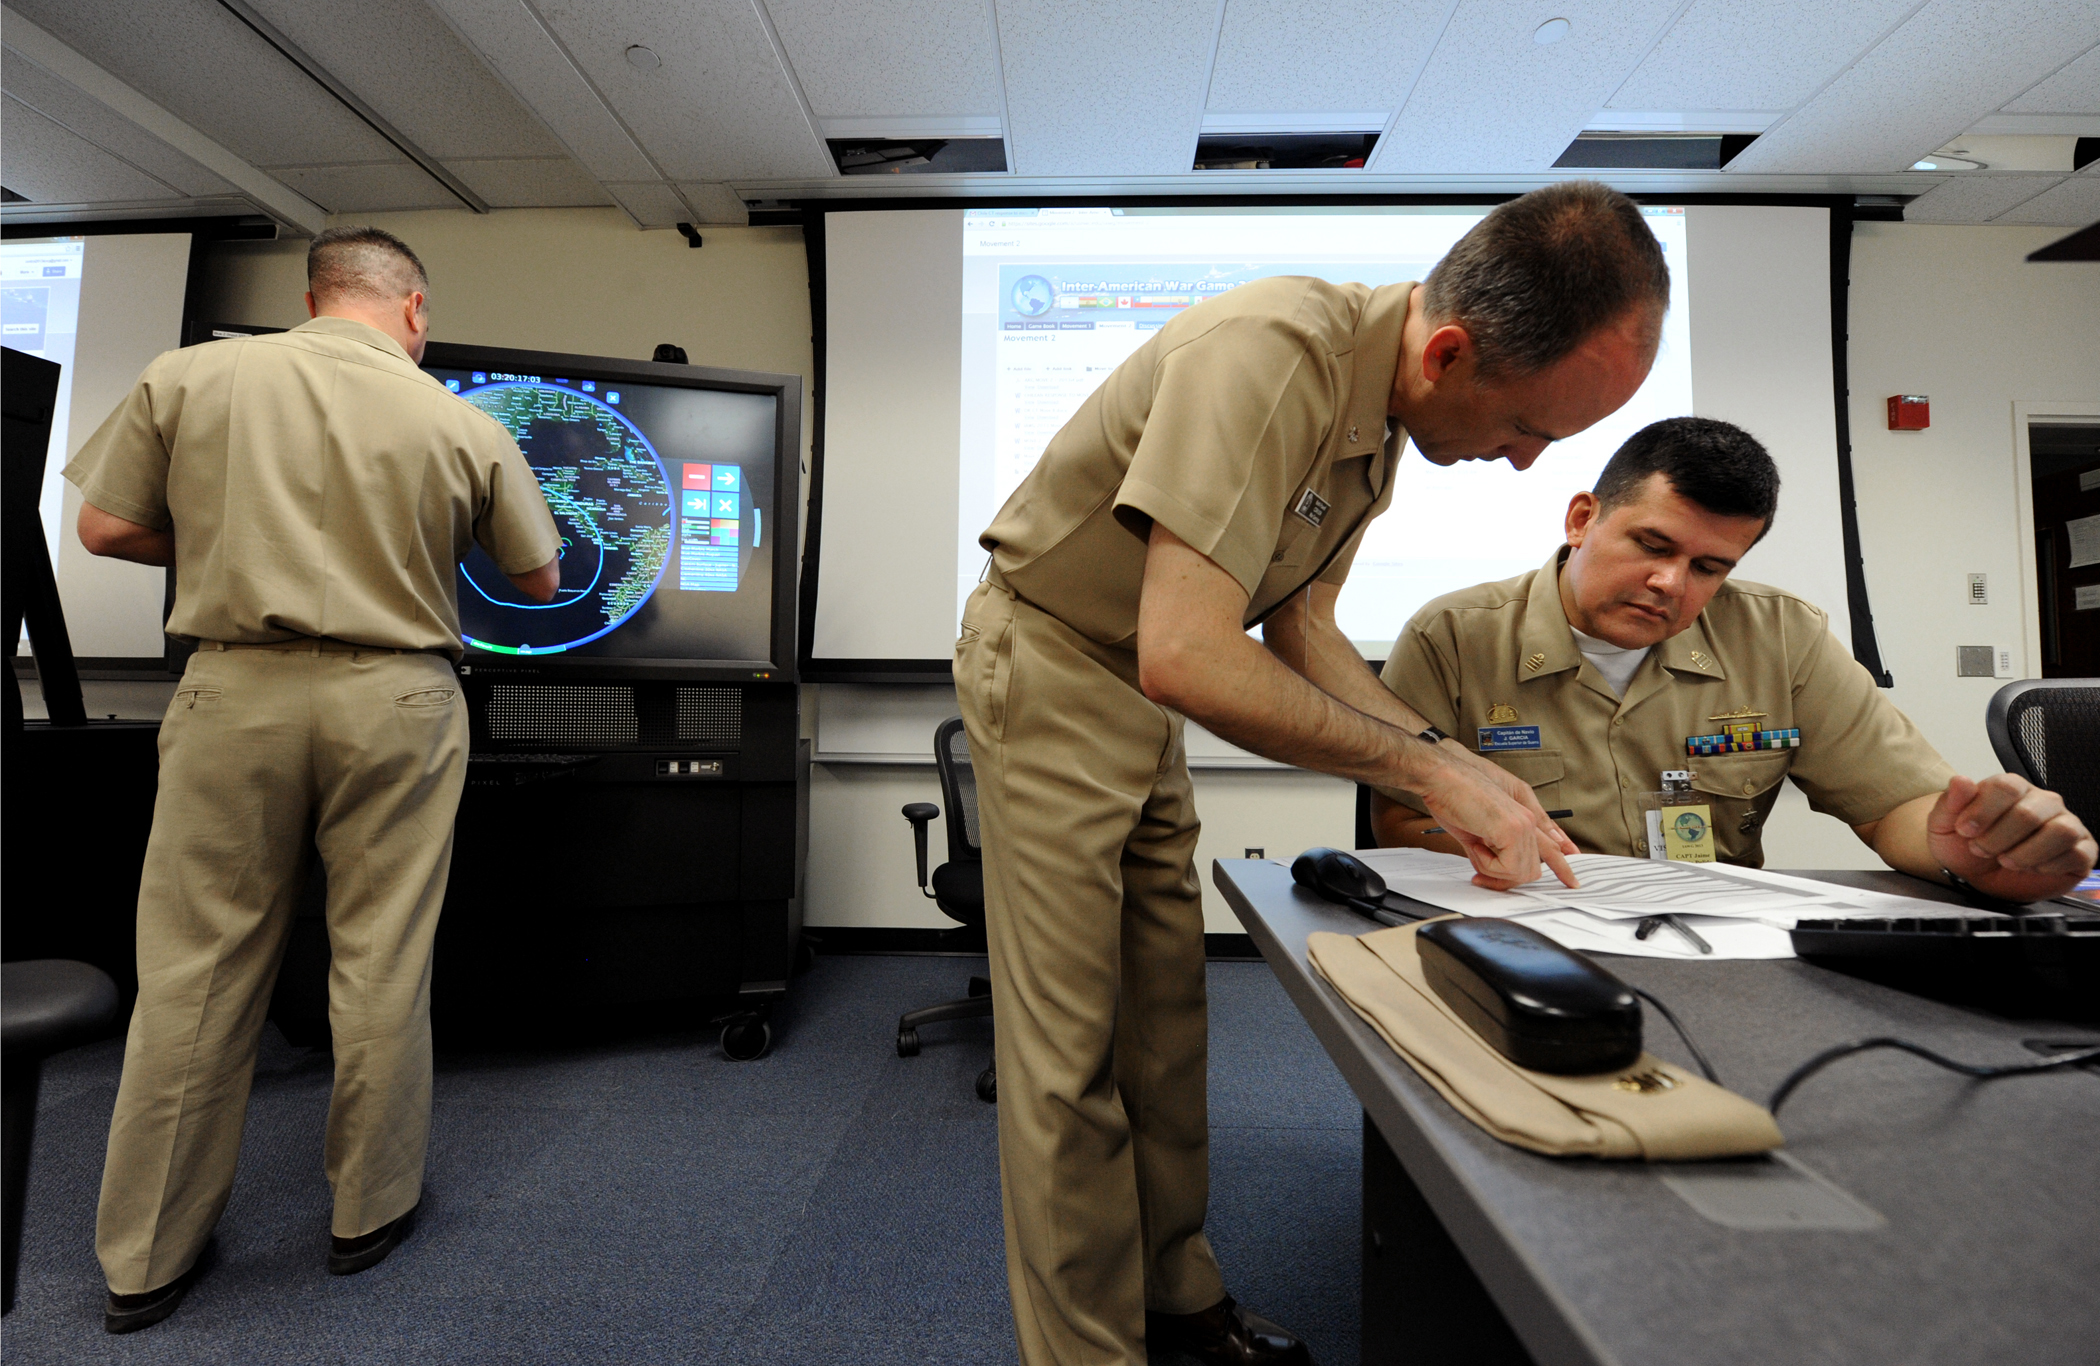 130509-N-PX557-055 (May 9, 2013) NEWPORT, R.I. Commander Keith Powell (center), assigned to U.S. Naval War College (NWC) war gaming department, and Colombian navy Capt. Jamie Garcia, from Escuela Superior de Guerra, collaborate together as Cdr. Dustin Martin (left), assigned to NWC war gaming department, provides inputs to a multi-touch multi-user interface as part of a control group at NWC in Newport, R.I. during the 2013 Inter-American War Game. The 2013 Inter-American War Game is a multinational online war game scenario facilitated through the hosting country’s control group. Control group members are responsible for oversight of the war gaming operations and provide face-to-face analysis, interpersonal discussion and feedback as the scenarios are executed. Multi-touch multi-user interfaces allow control group members to visually depict war gaming player movements for analysis and adjudication. (U.S. Navy photo by Chief Mass Communication Specialist James E. Foehl/Released)